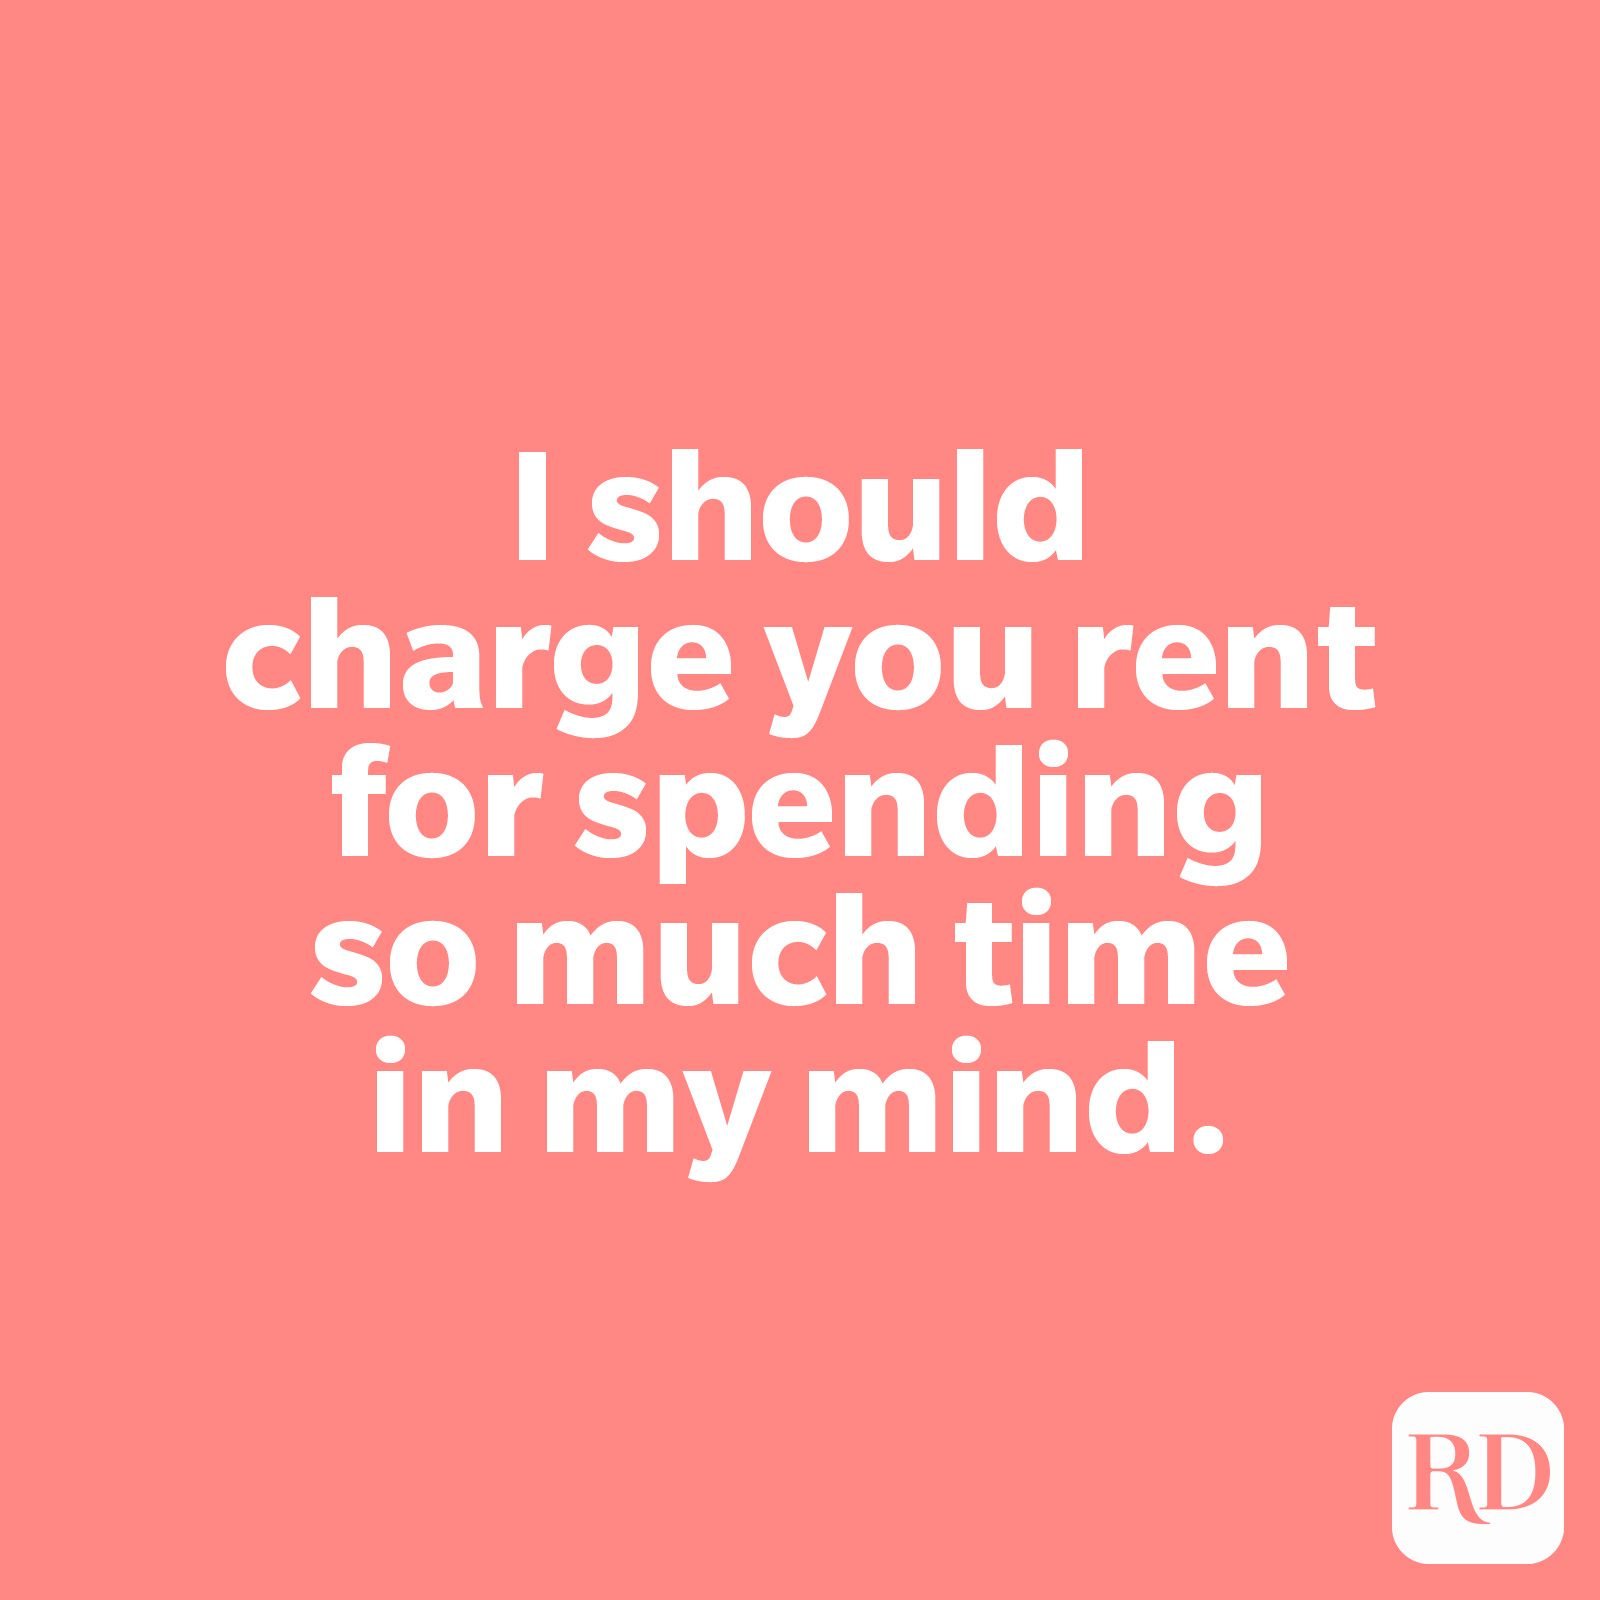 I should charge you rent for spending so much time in my mind.